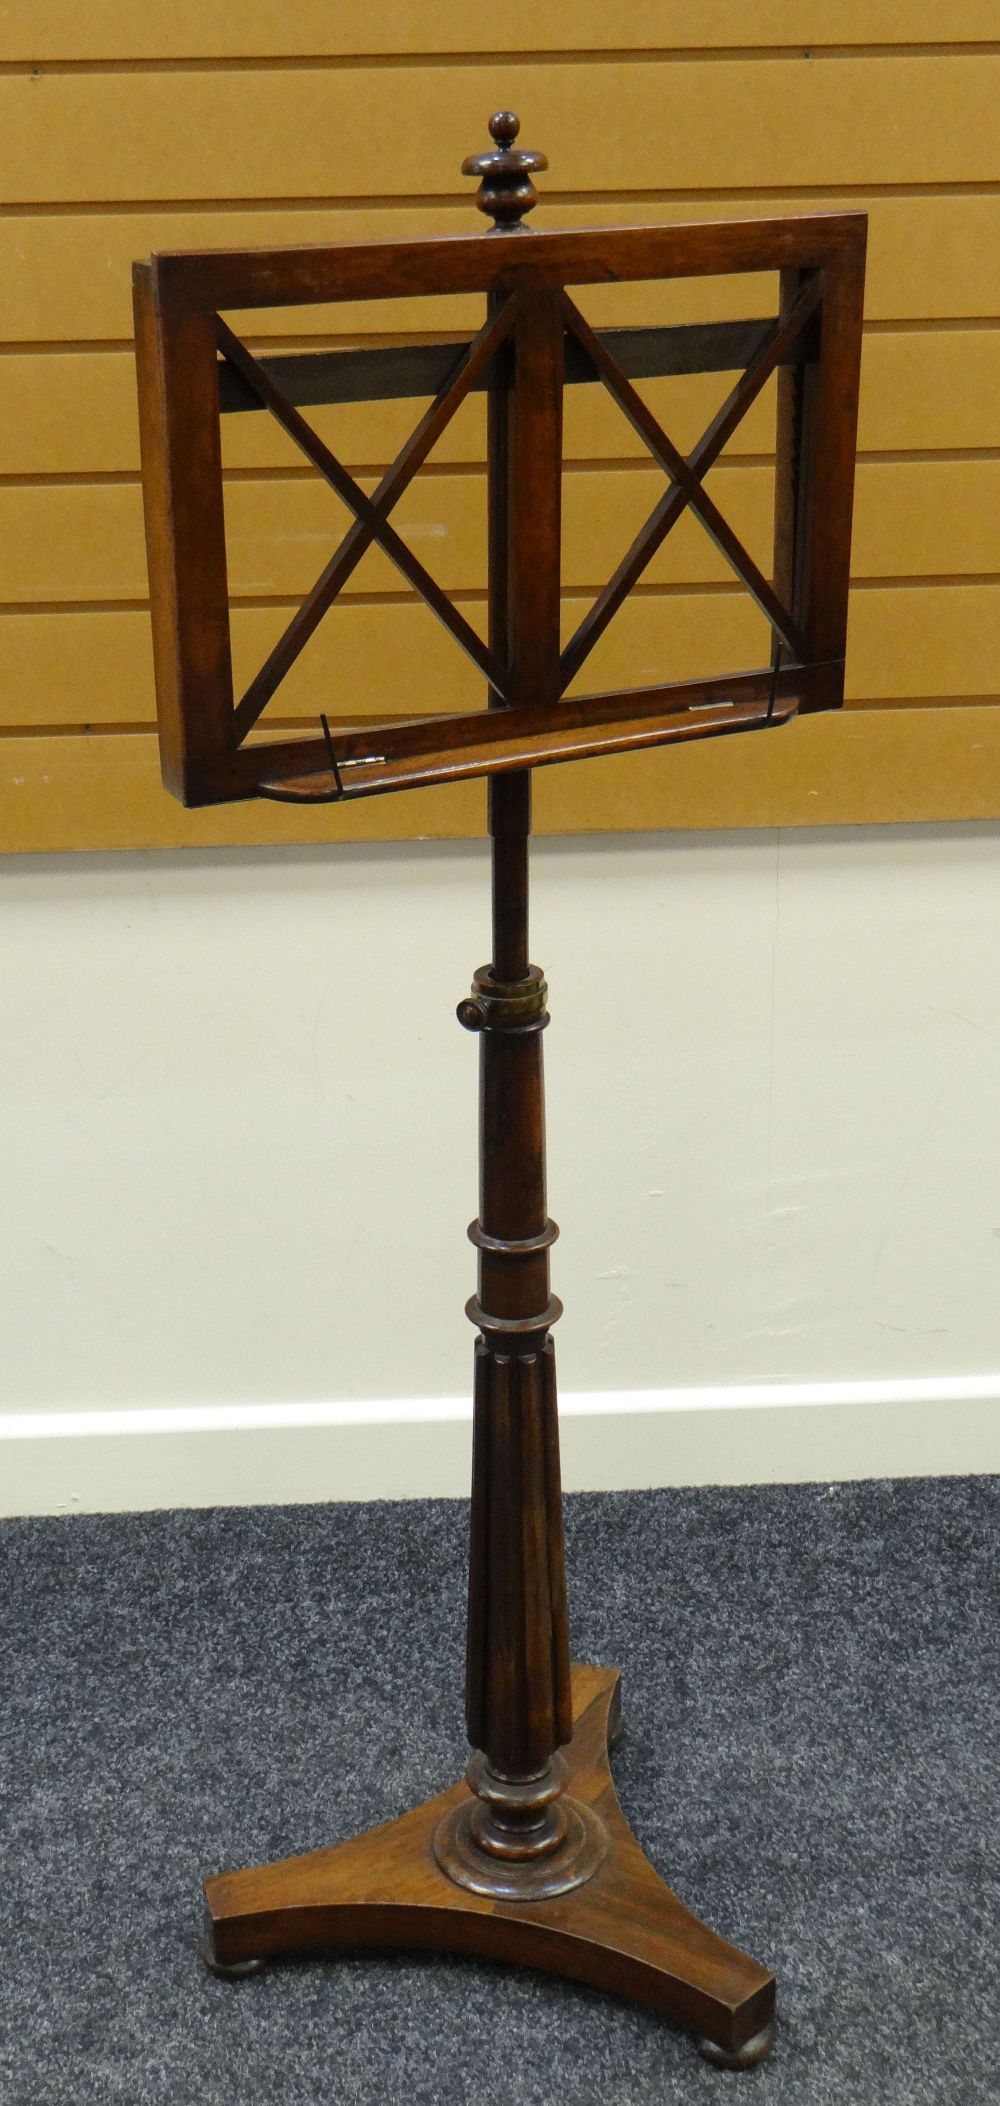 LATE NINETEENTH CENTURY ROSEWOOD MUSIC STAND having turned finial above ratchet design adjustable - Image 2 of 2